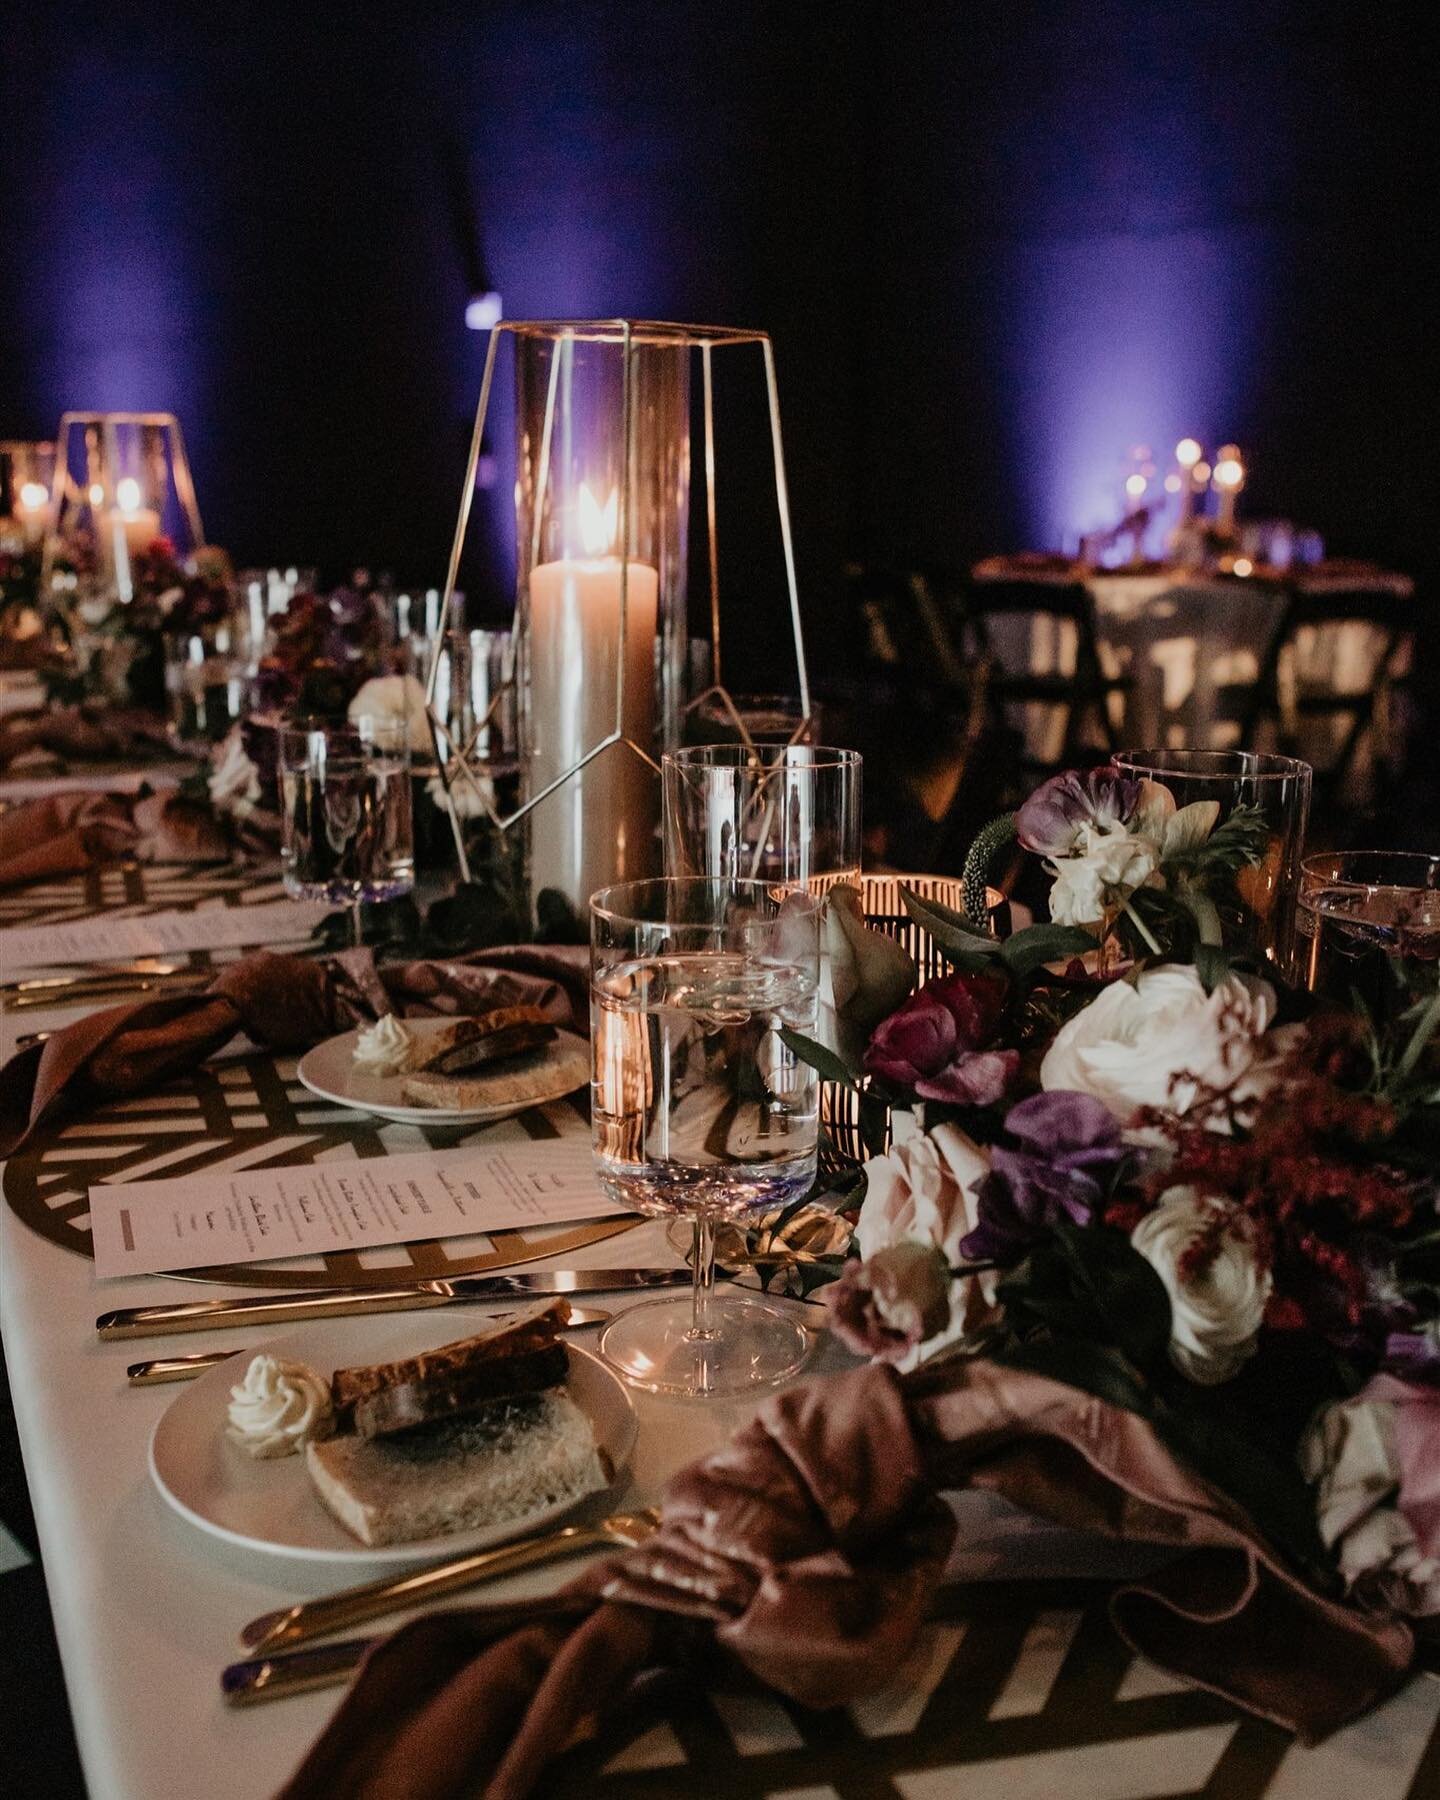 When the bride was a wedding planner, you KNOW the details are going to be amazing! Moody, luxe, and romantic all the way. 

Design + Planning: @glintevents Photos: @lordjustyn 
Florals: @amandaburnettefloral 
Rentals: @rentequipva @paisleyandjade 
L